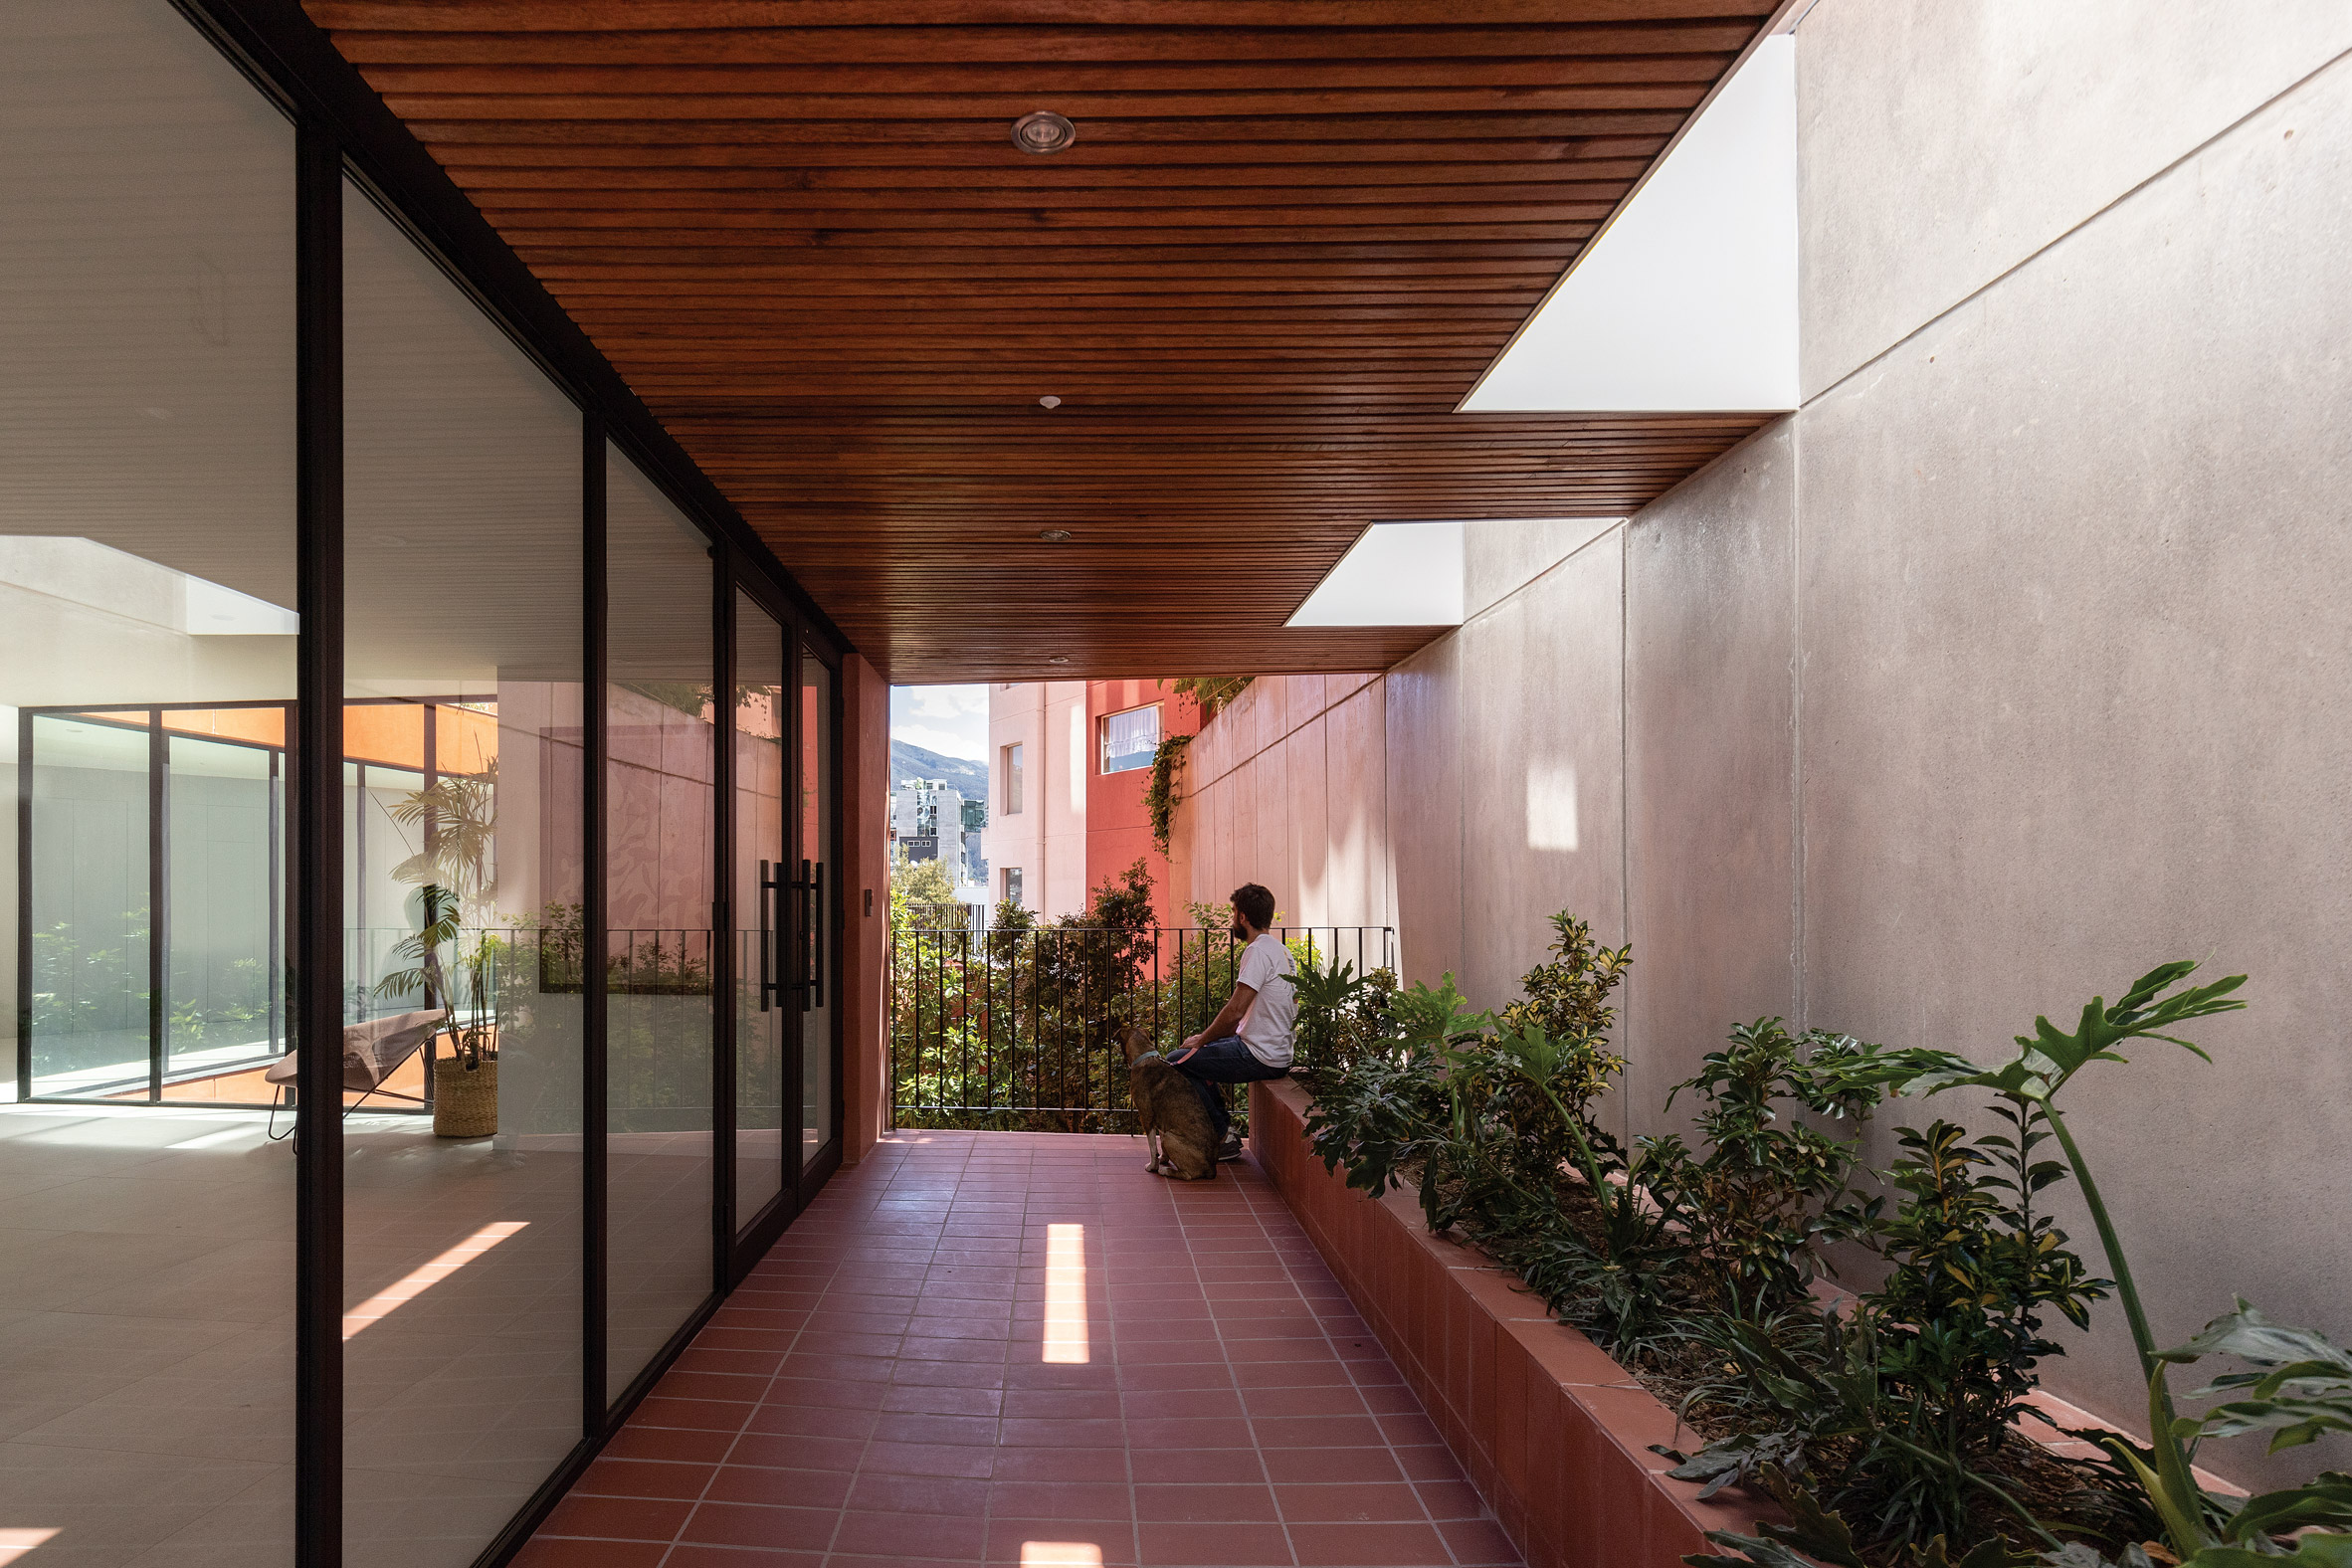 Open-air space with native plants within Olvia building by Urlo Studio